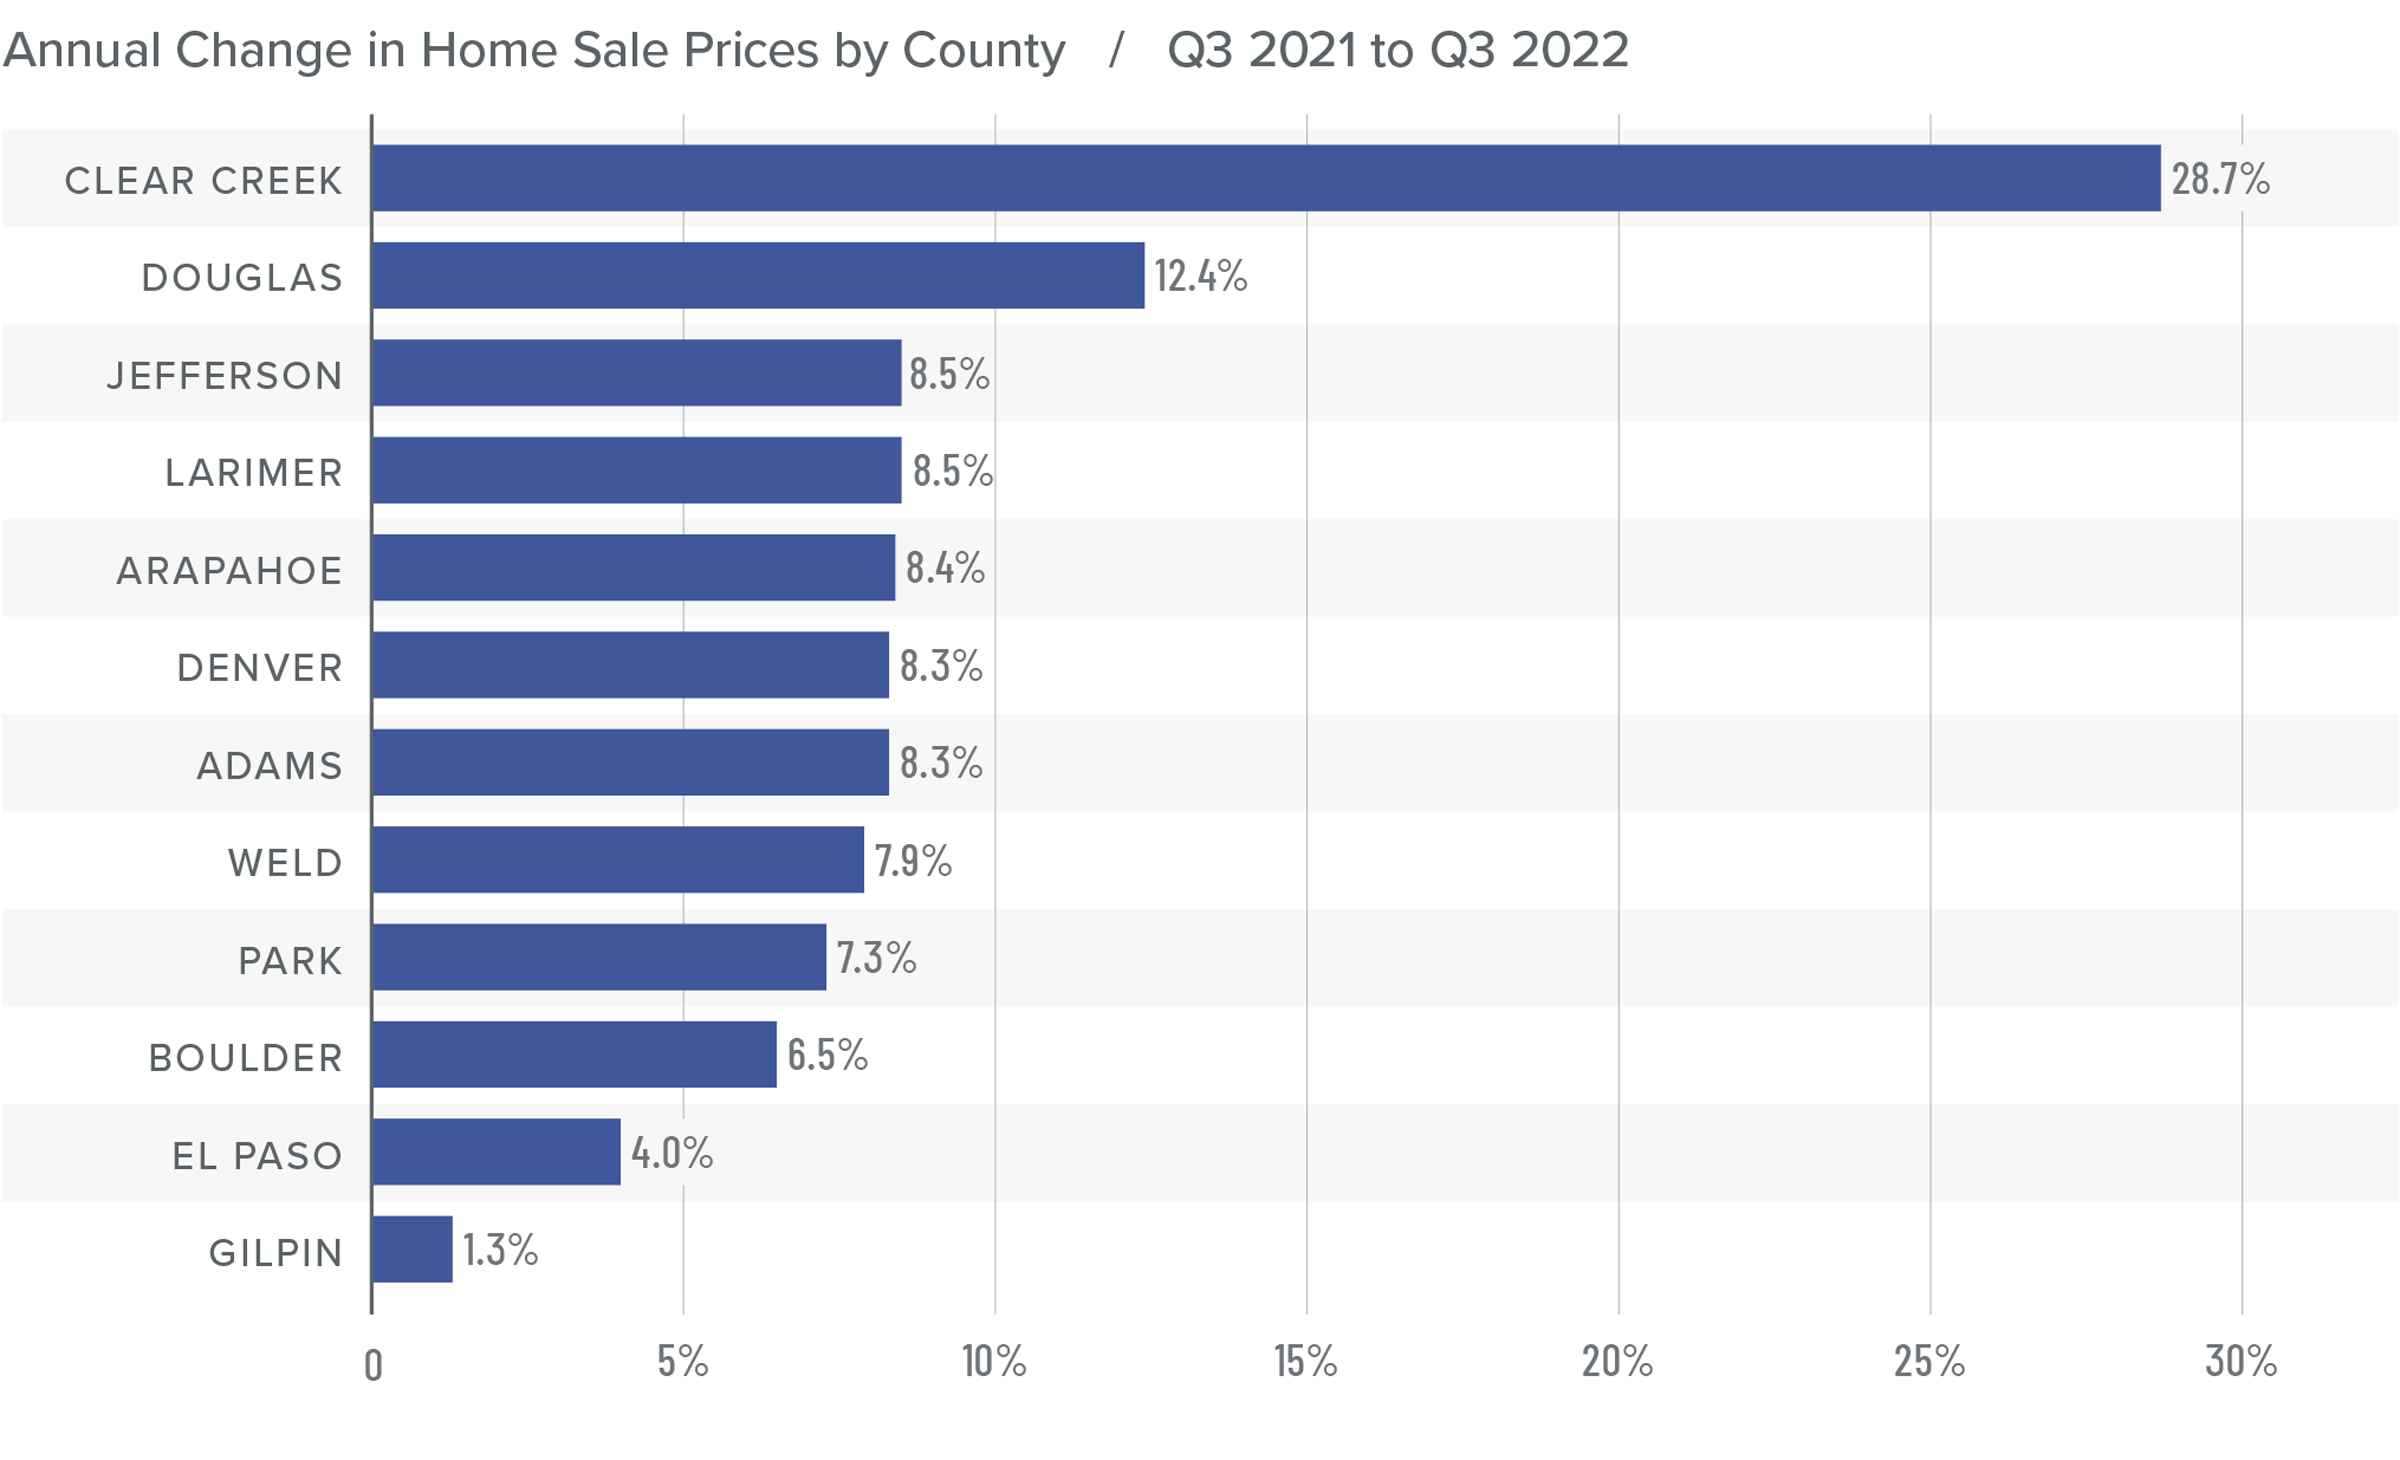 A bar graph showing the annual change in home sale prices for various counties in Colorado from Q3 2021 to Q3 2022. Clear Creek County tops the list at 28.7%, followed by Douglas at 12.4%, Jefferson and Larimer at 8.5%, Arapahoe at 8.4%, Denver and Adams at 8.3%, Weld at 7.9%, Park at 7.3%, Boulder 6.5%, El Paso 4%, and Gilpin 1.3%.